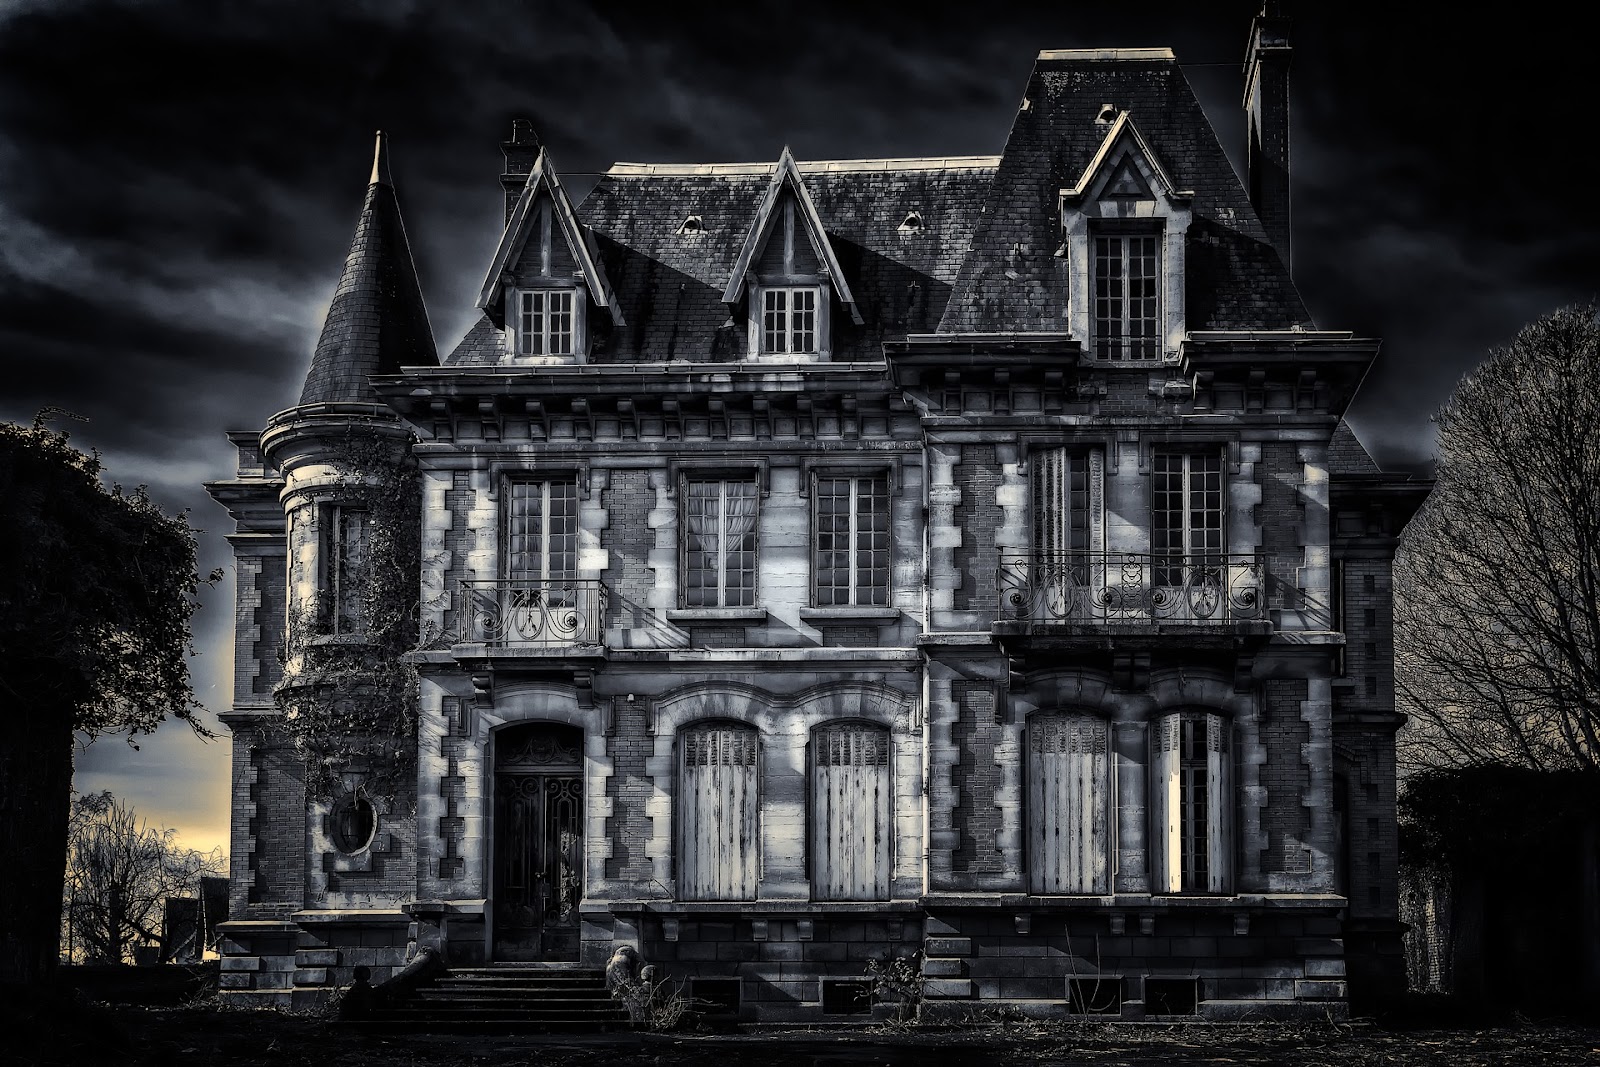 An image of a house haunted